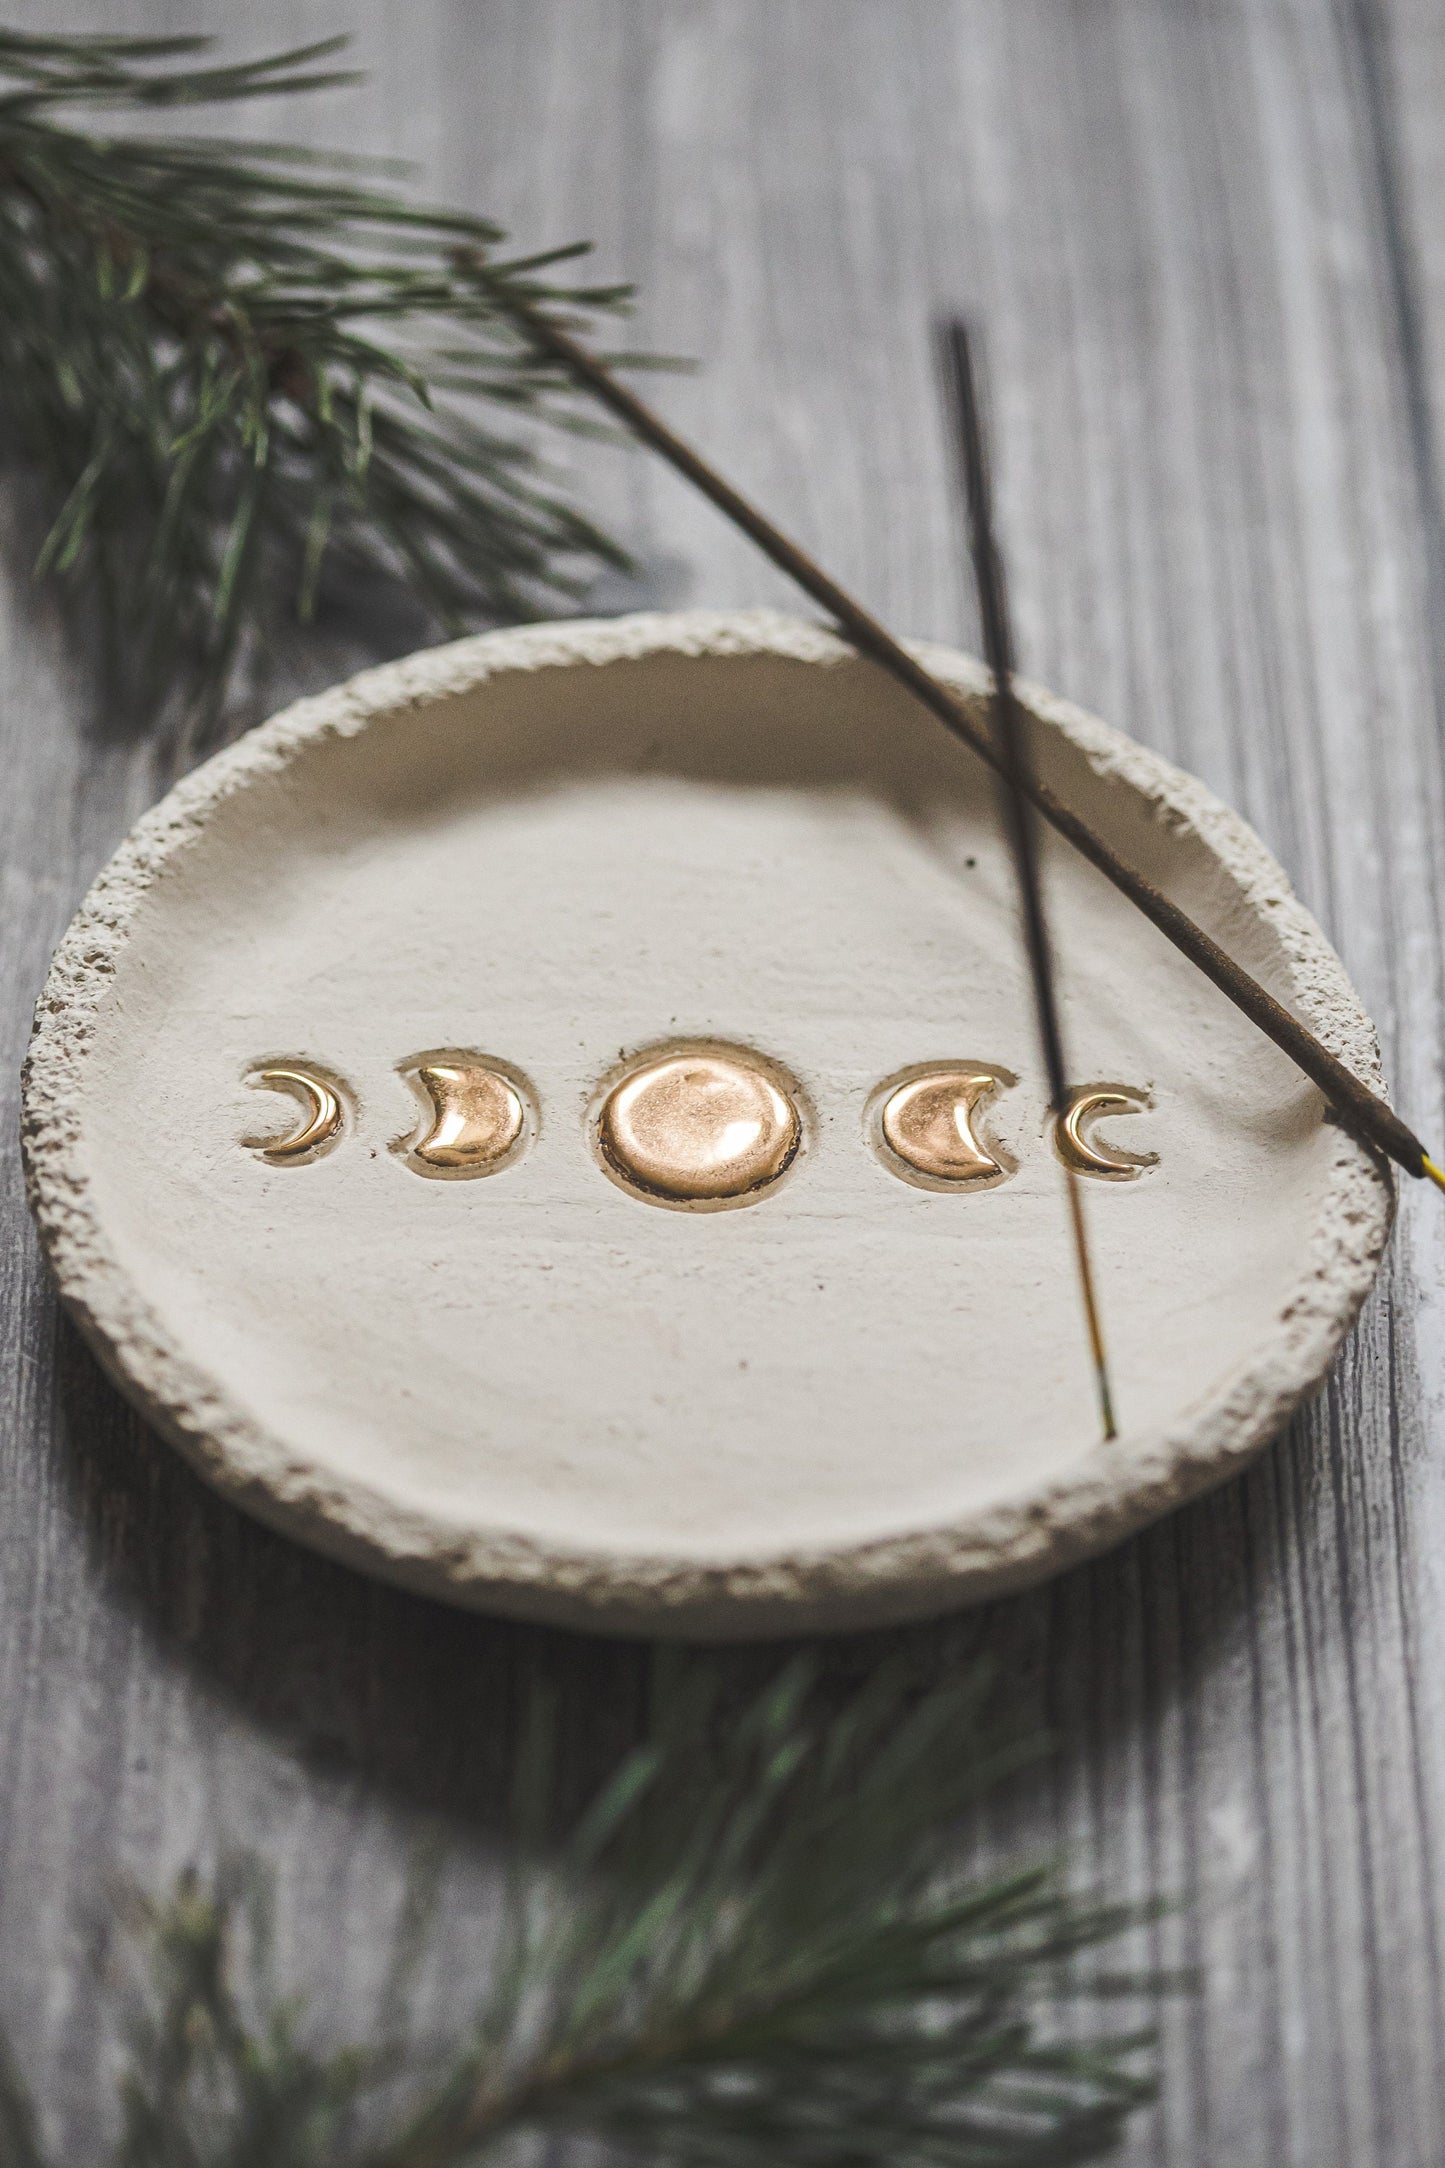 Frankincense burning ceramic plate with moon phases - Lunar phase gold plated cone incense burner tray